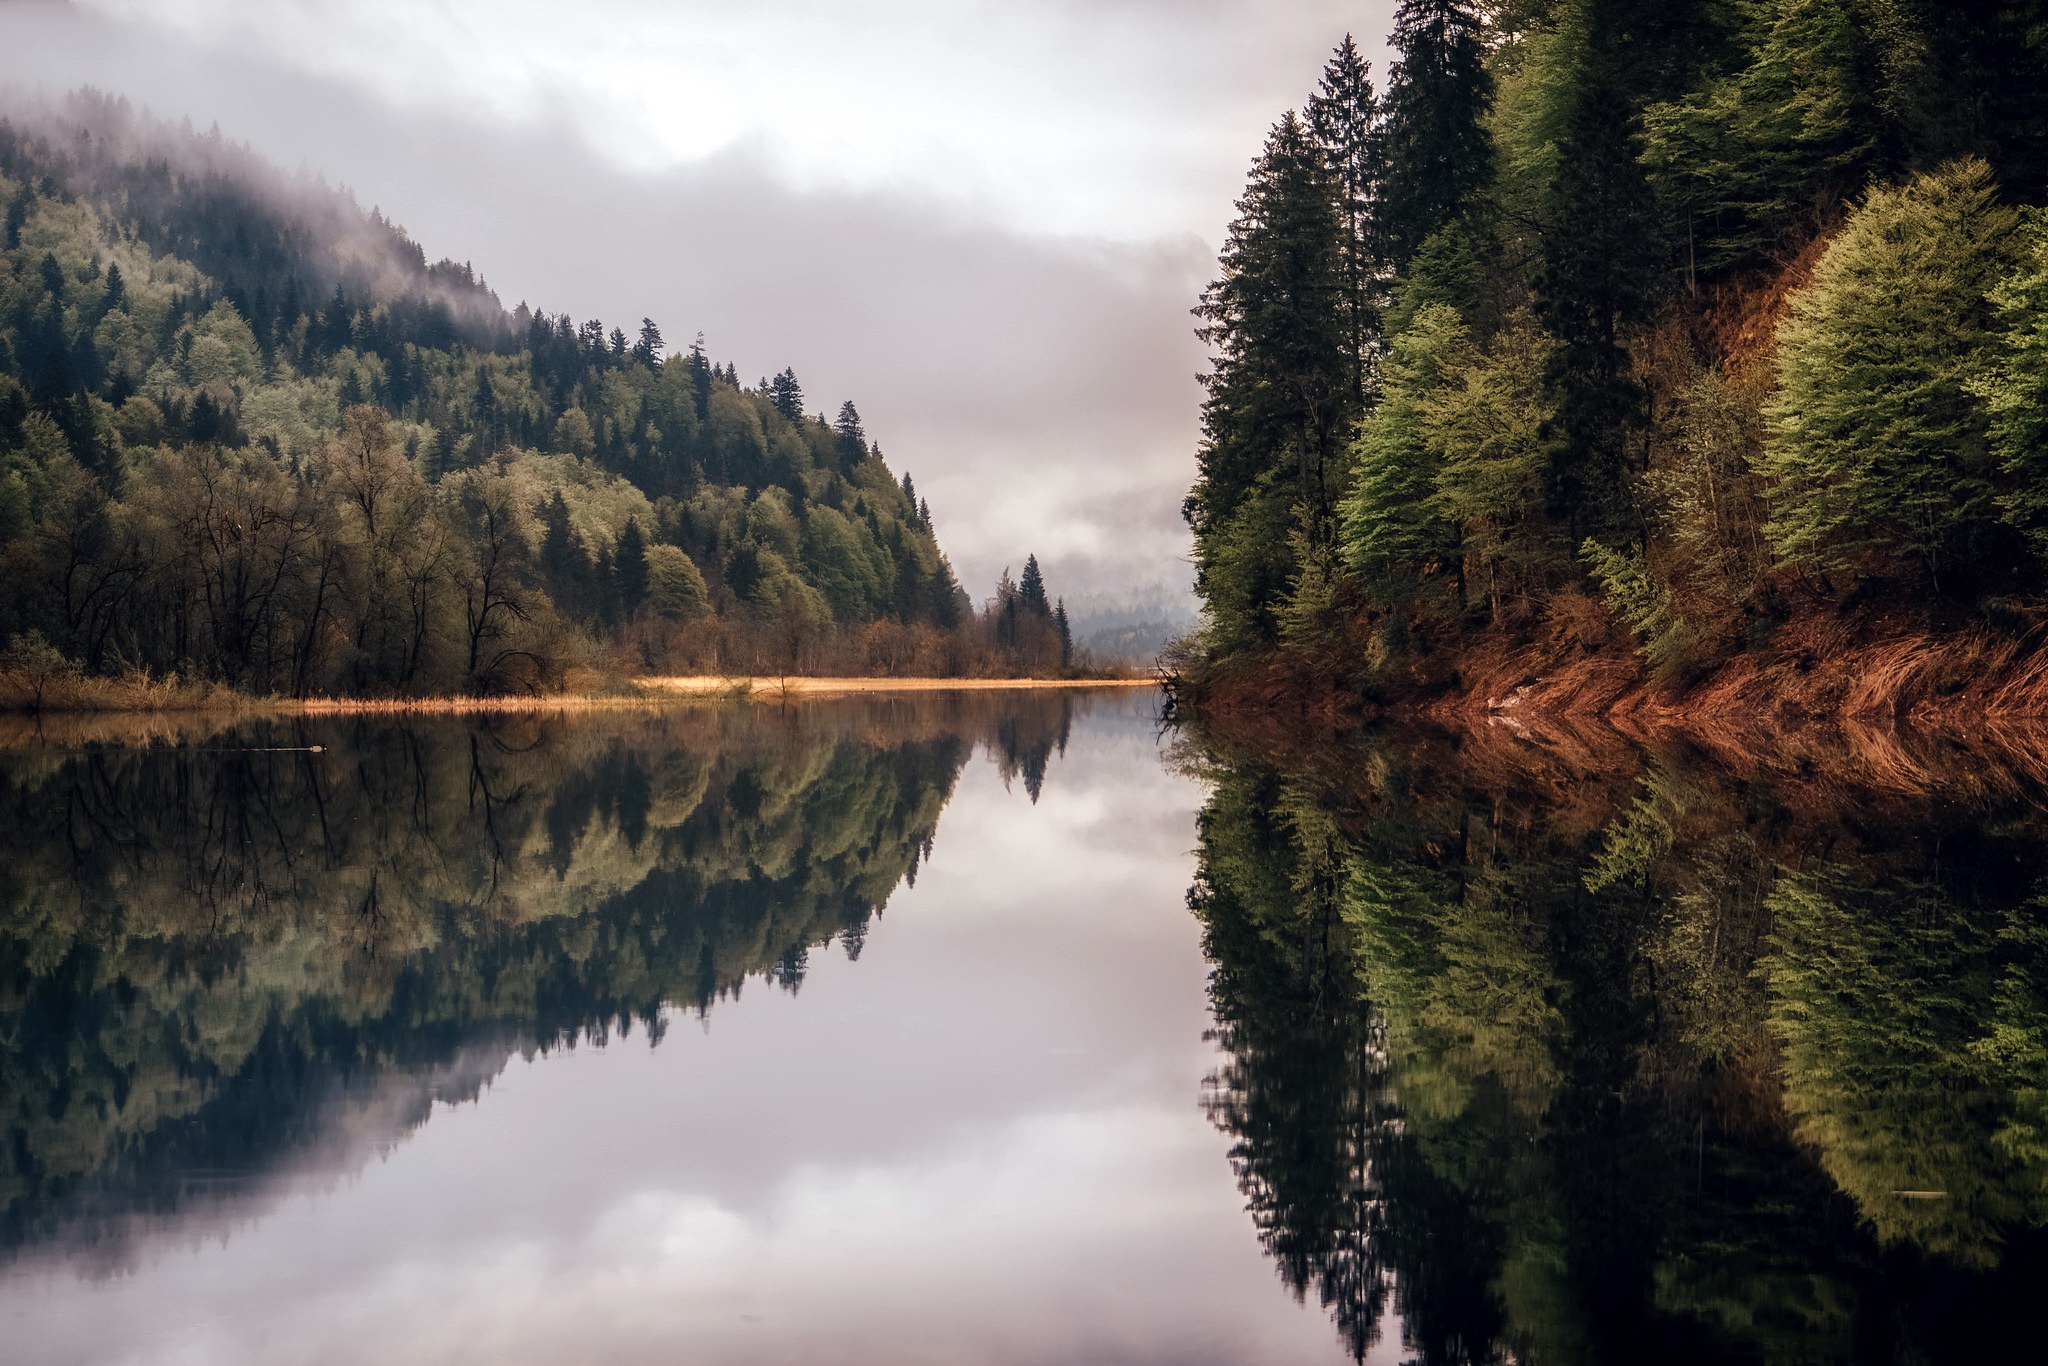 General 2048x1366 water trees nature reflection symmetry calm waters mist lake